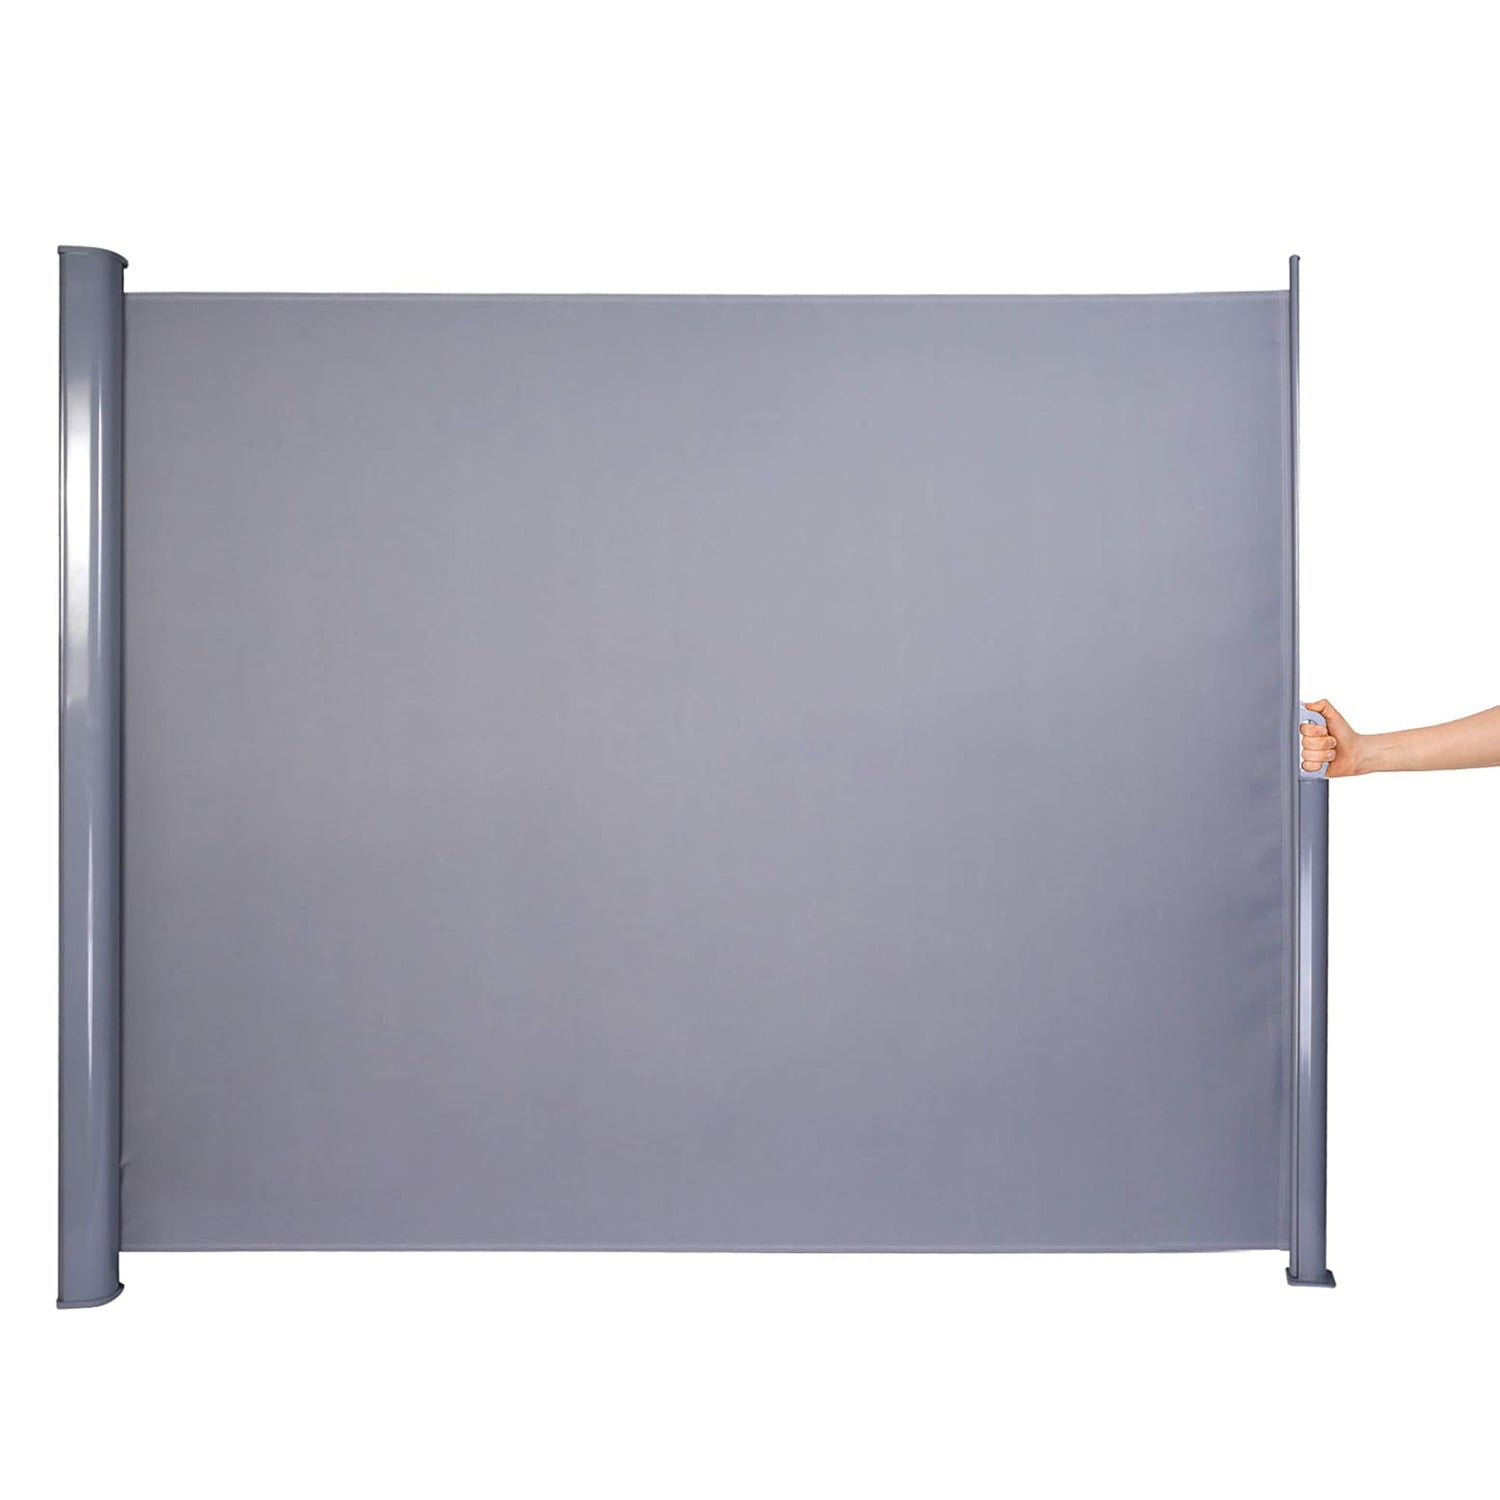 118"L x 78.7"H Retractable Side Awning Aluminum Patio Outdoor Folding Privacy Divider, Gray